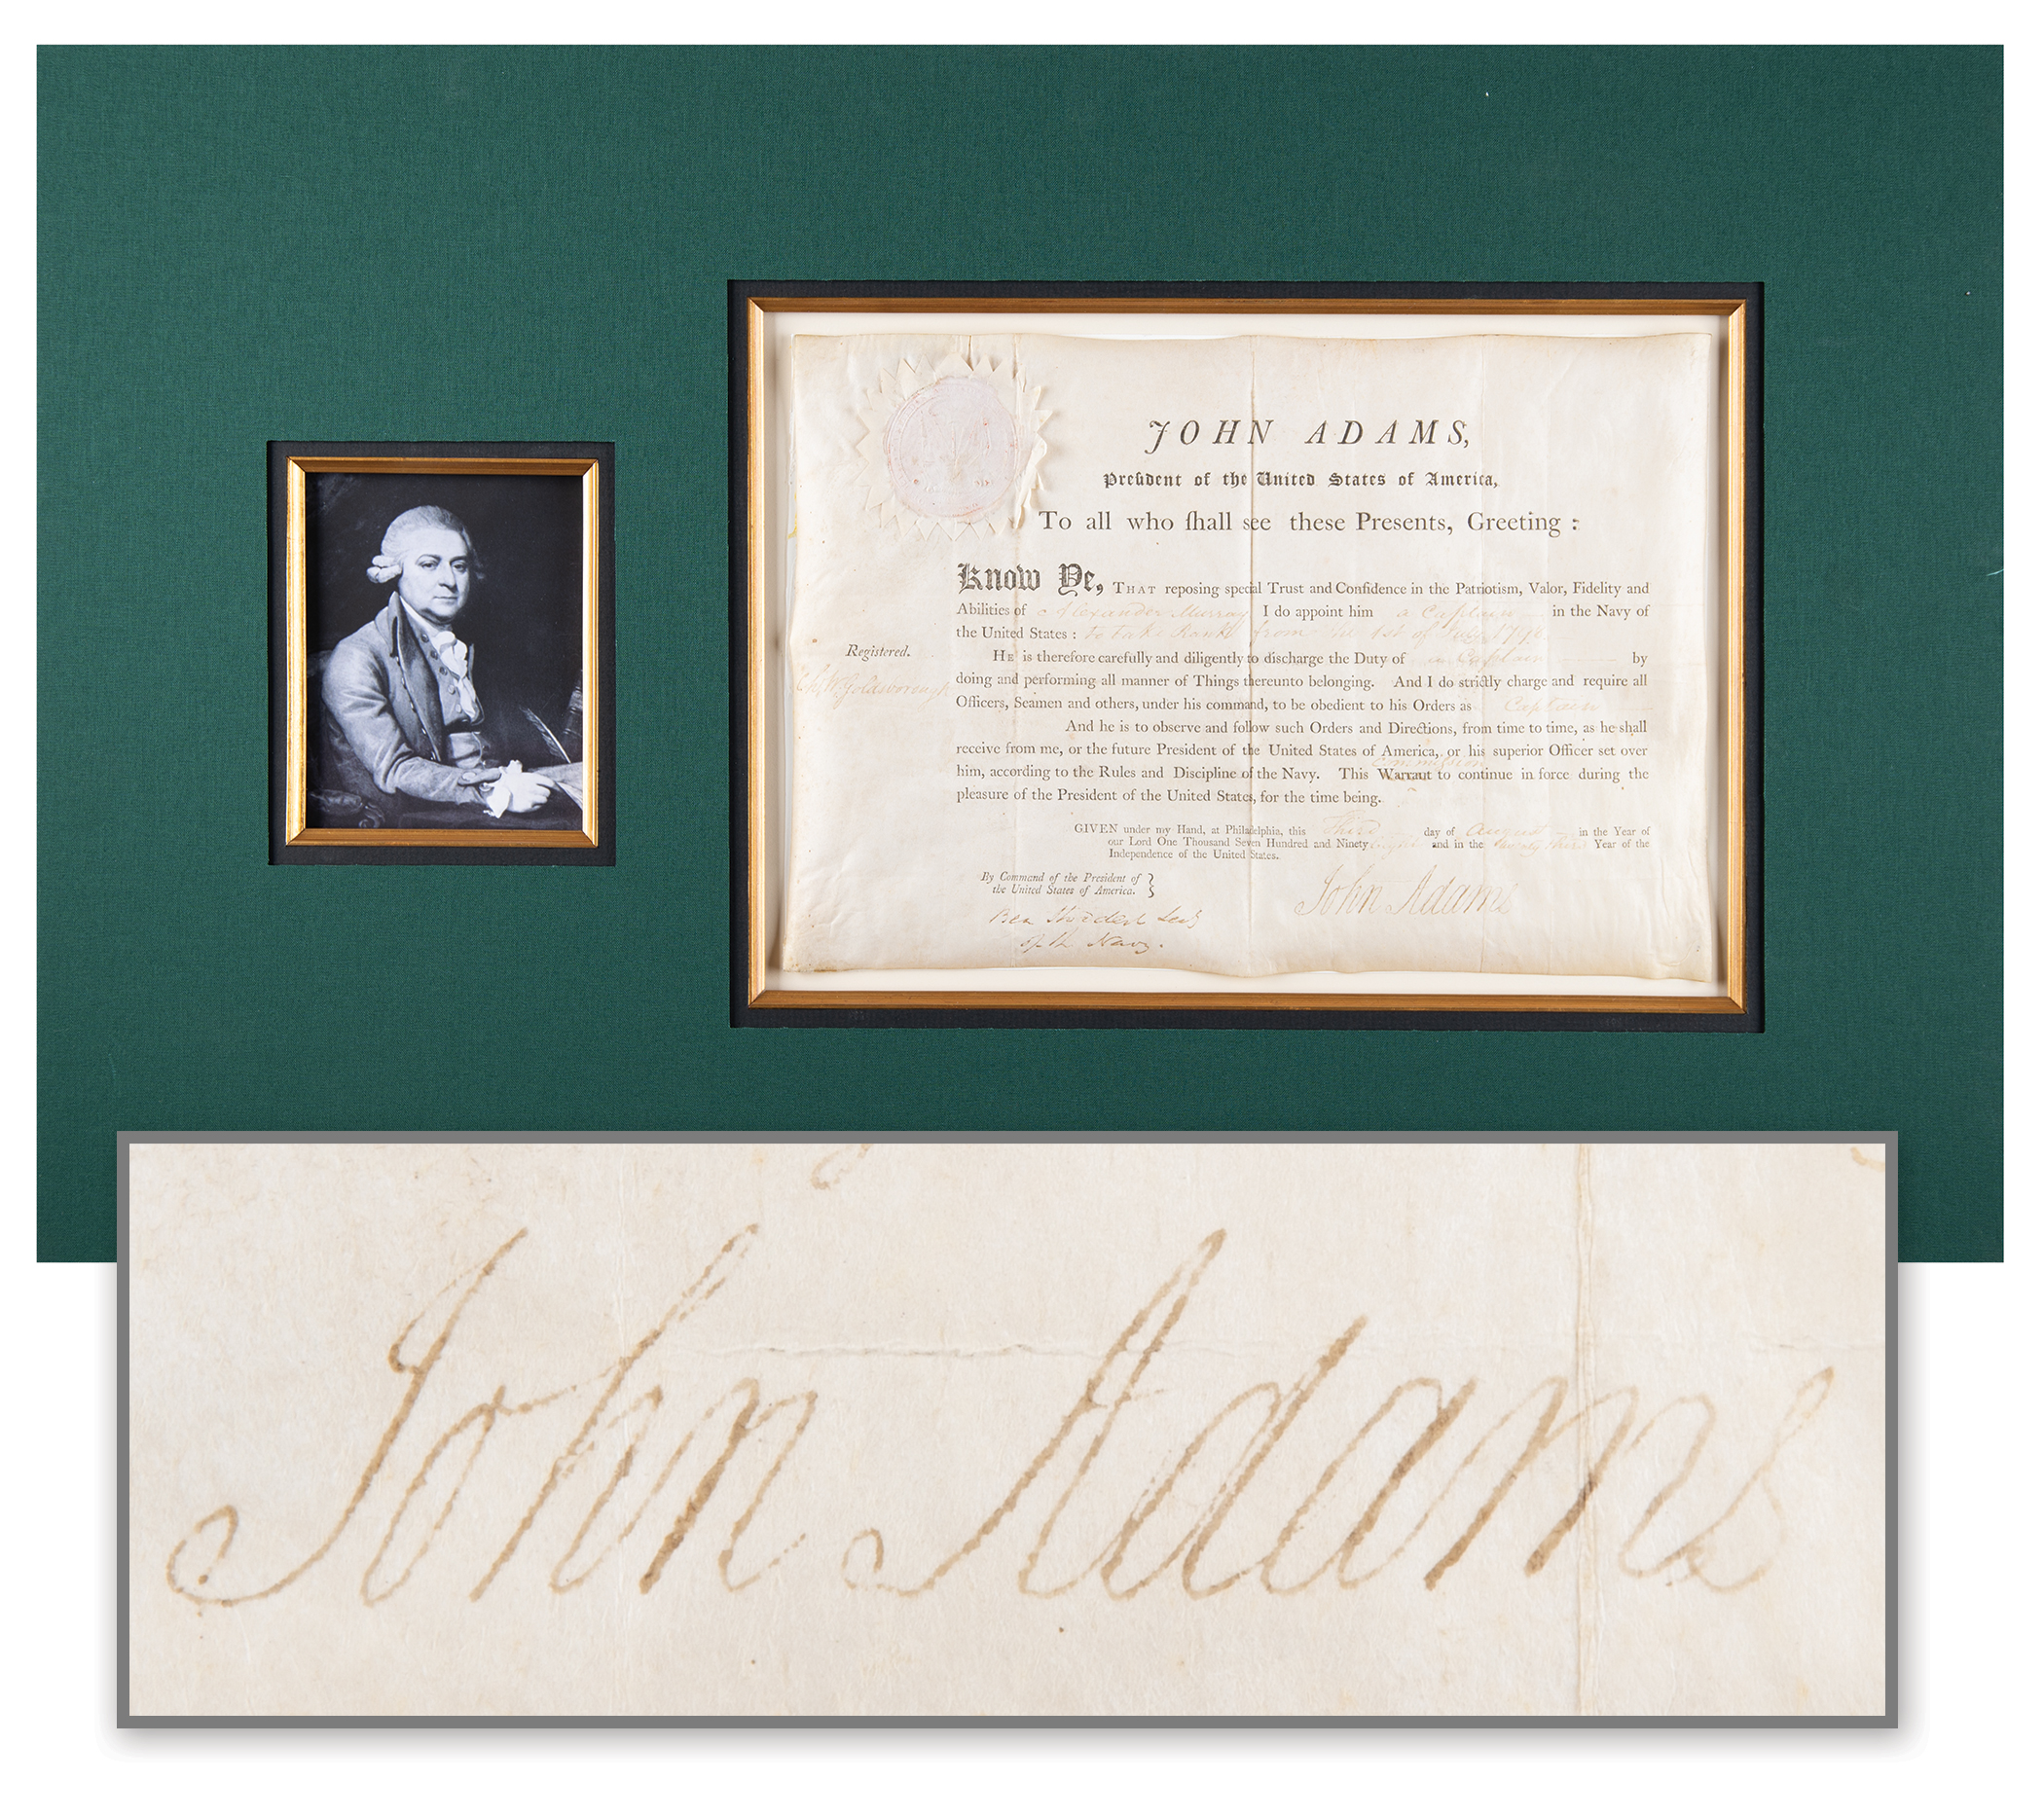 Lot #4 John Adams Document Signed as President for Alexander Murray, One of the US Navy's First Post-Captains - Image 1